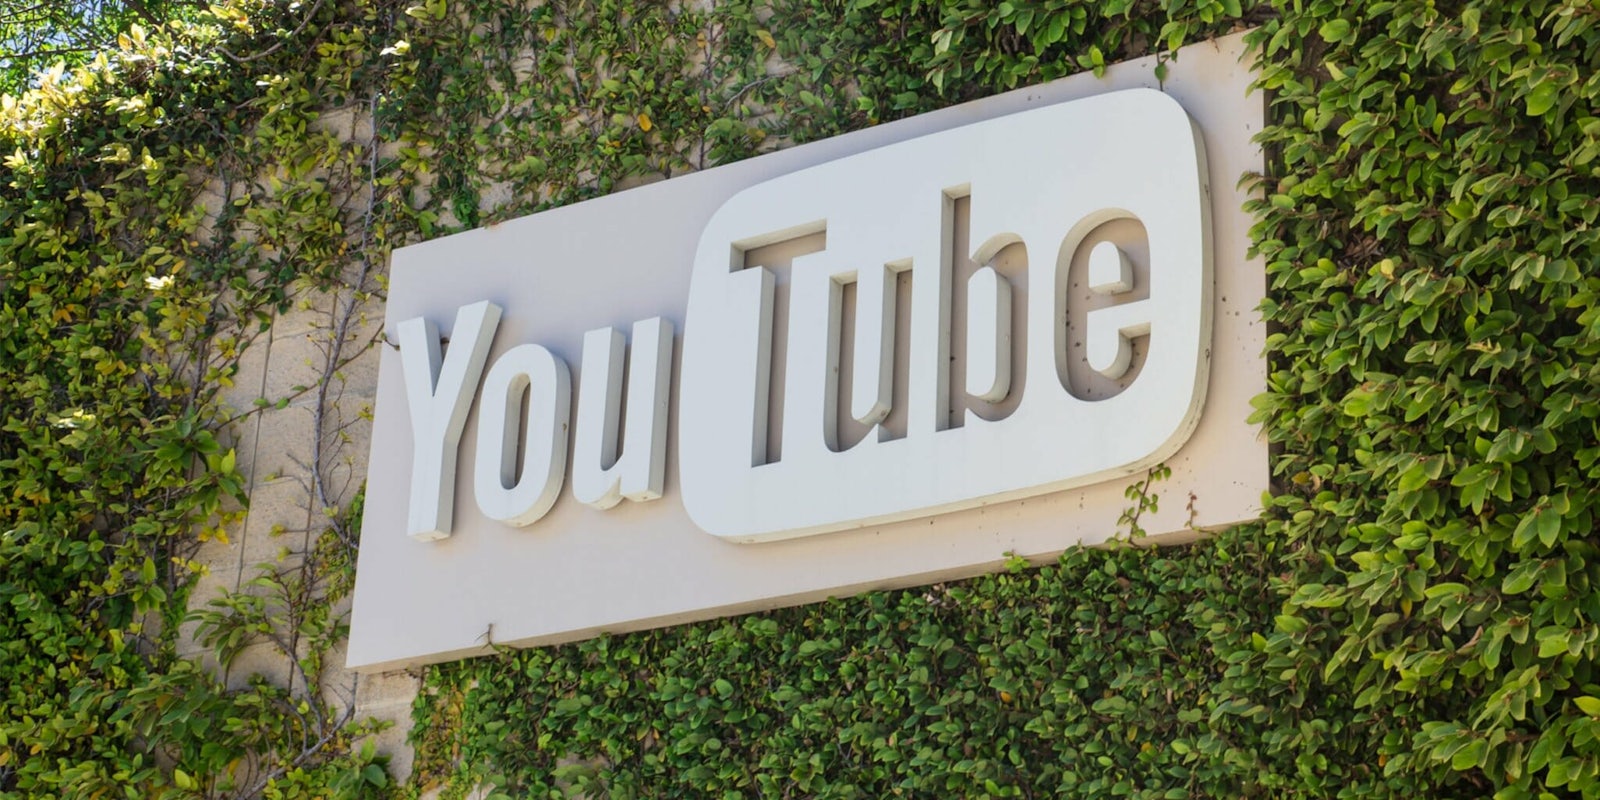 YouTube threat shooting campus